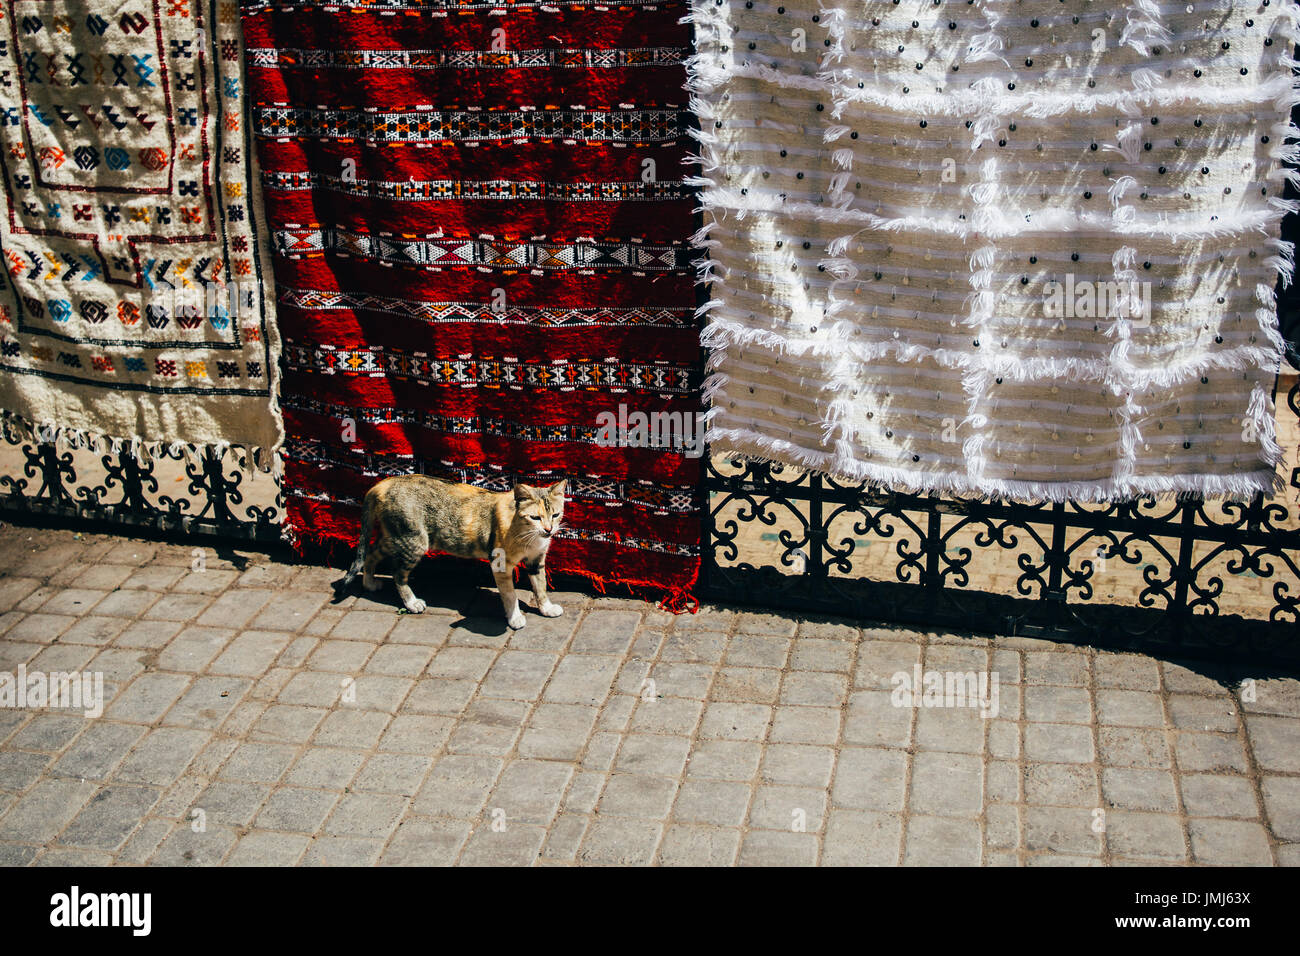 Cat standing in the streets of Marrakech, Morocco, in front of traditional rugs or tapestries. Stock Photo